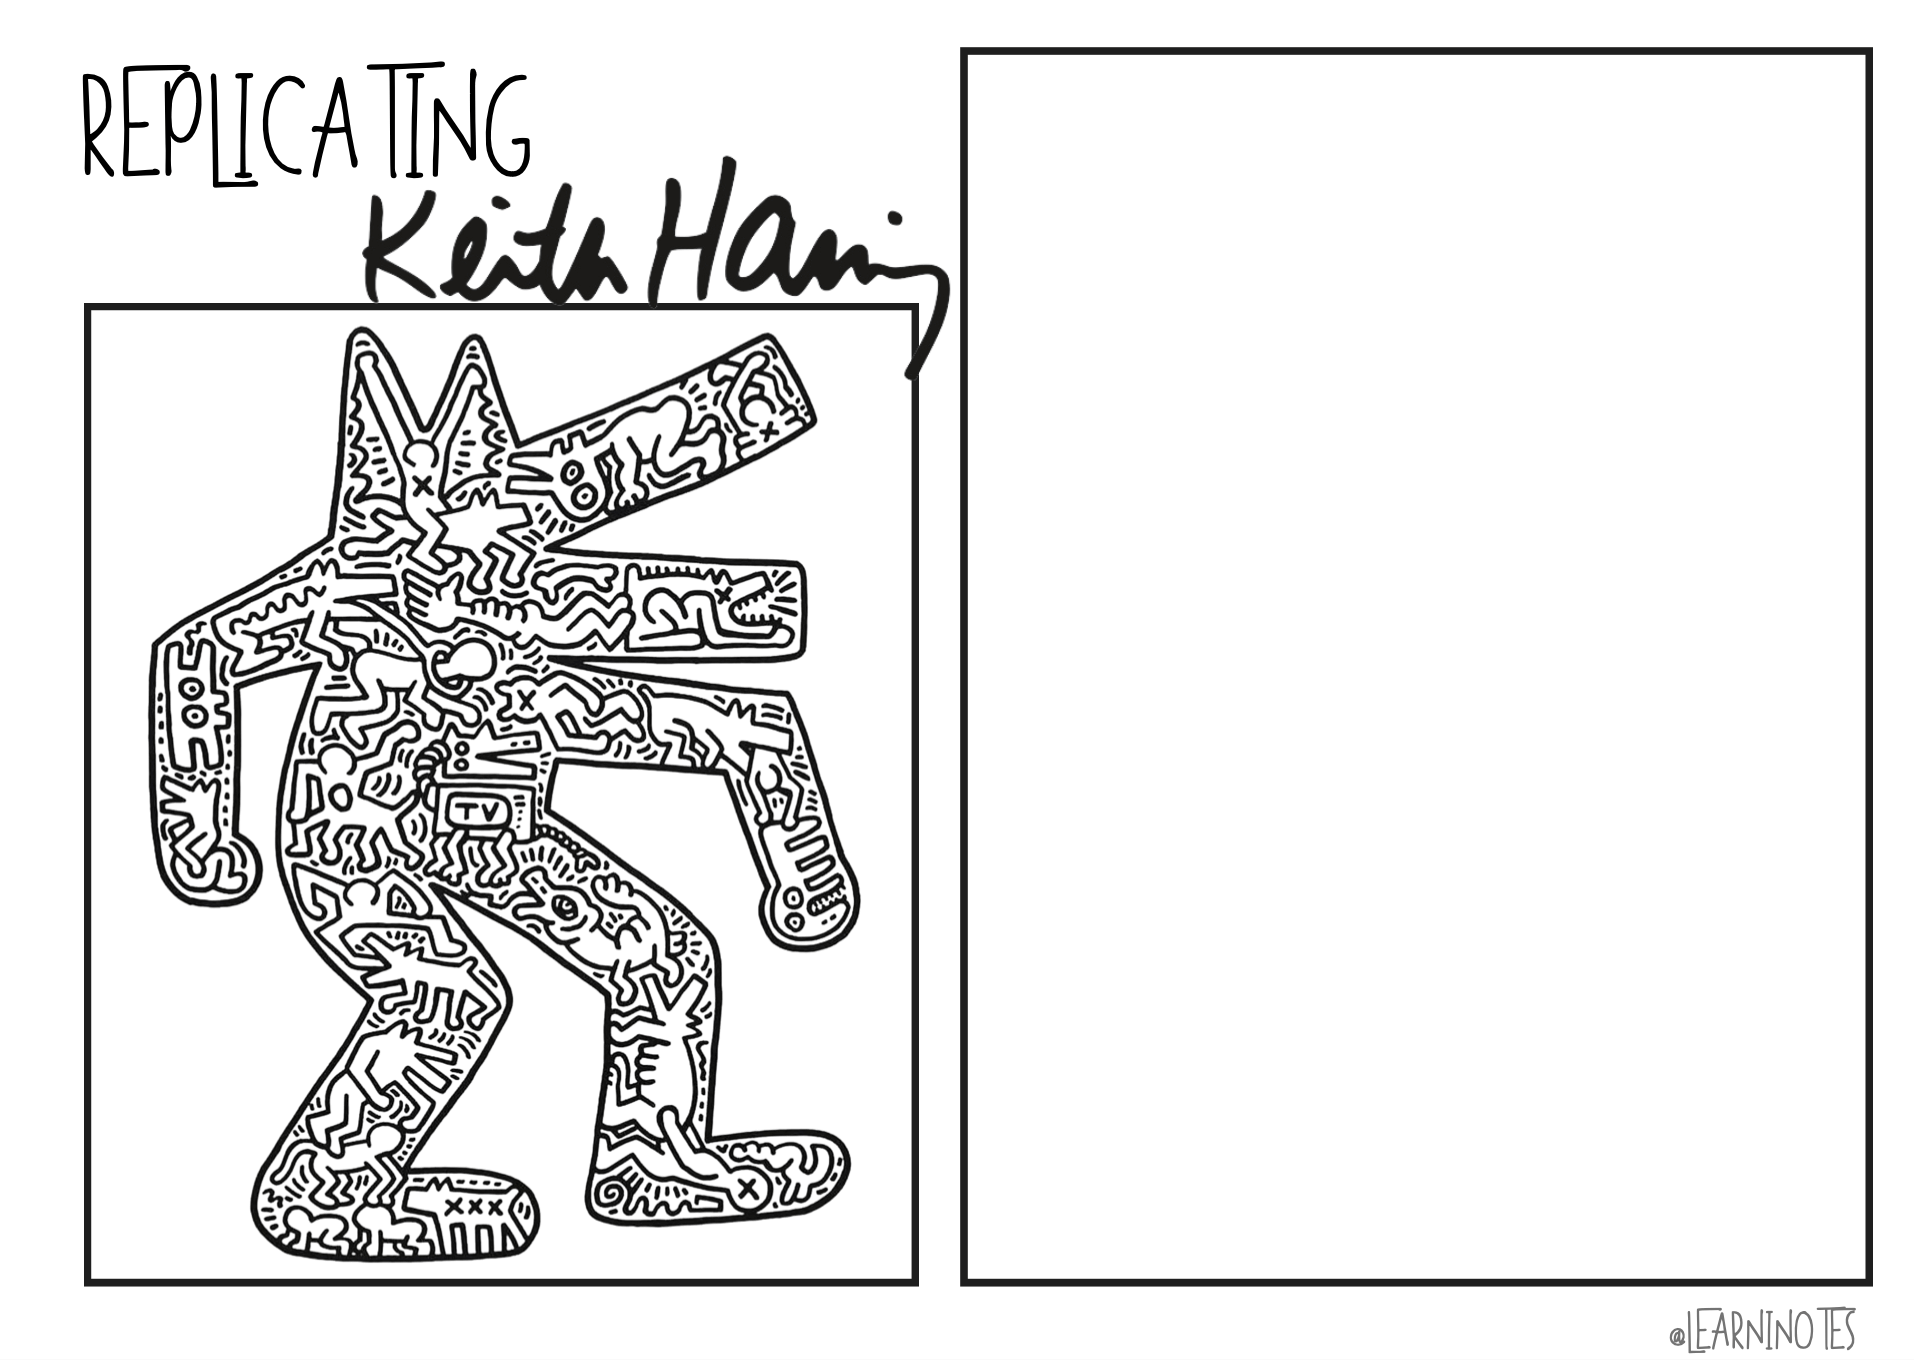 PROJECT ARTIST KEITH HARING